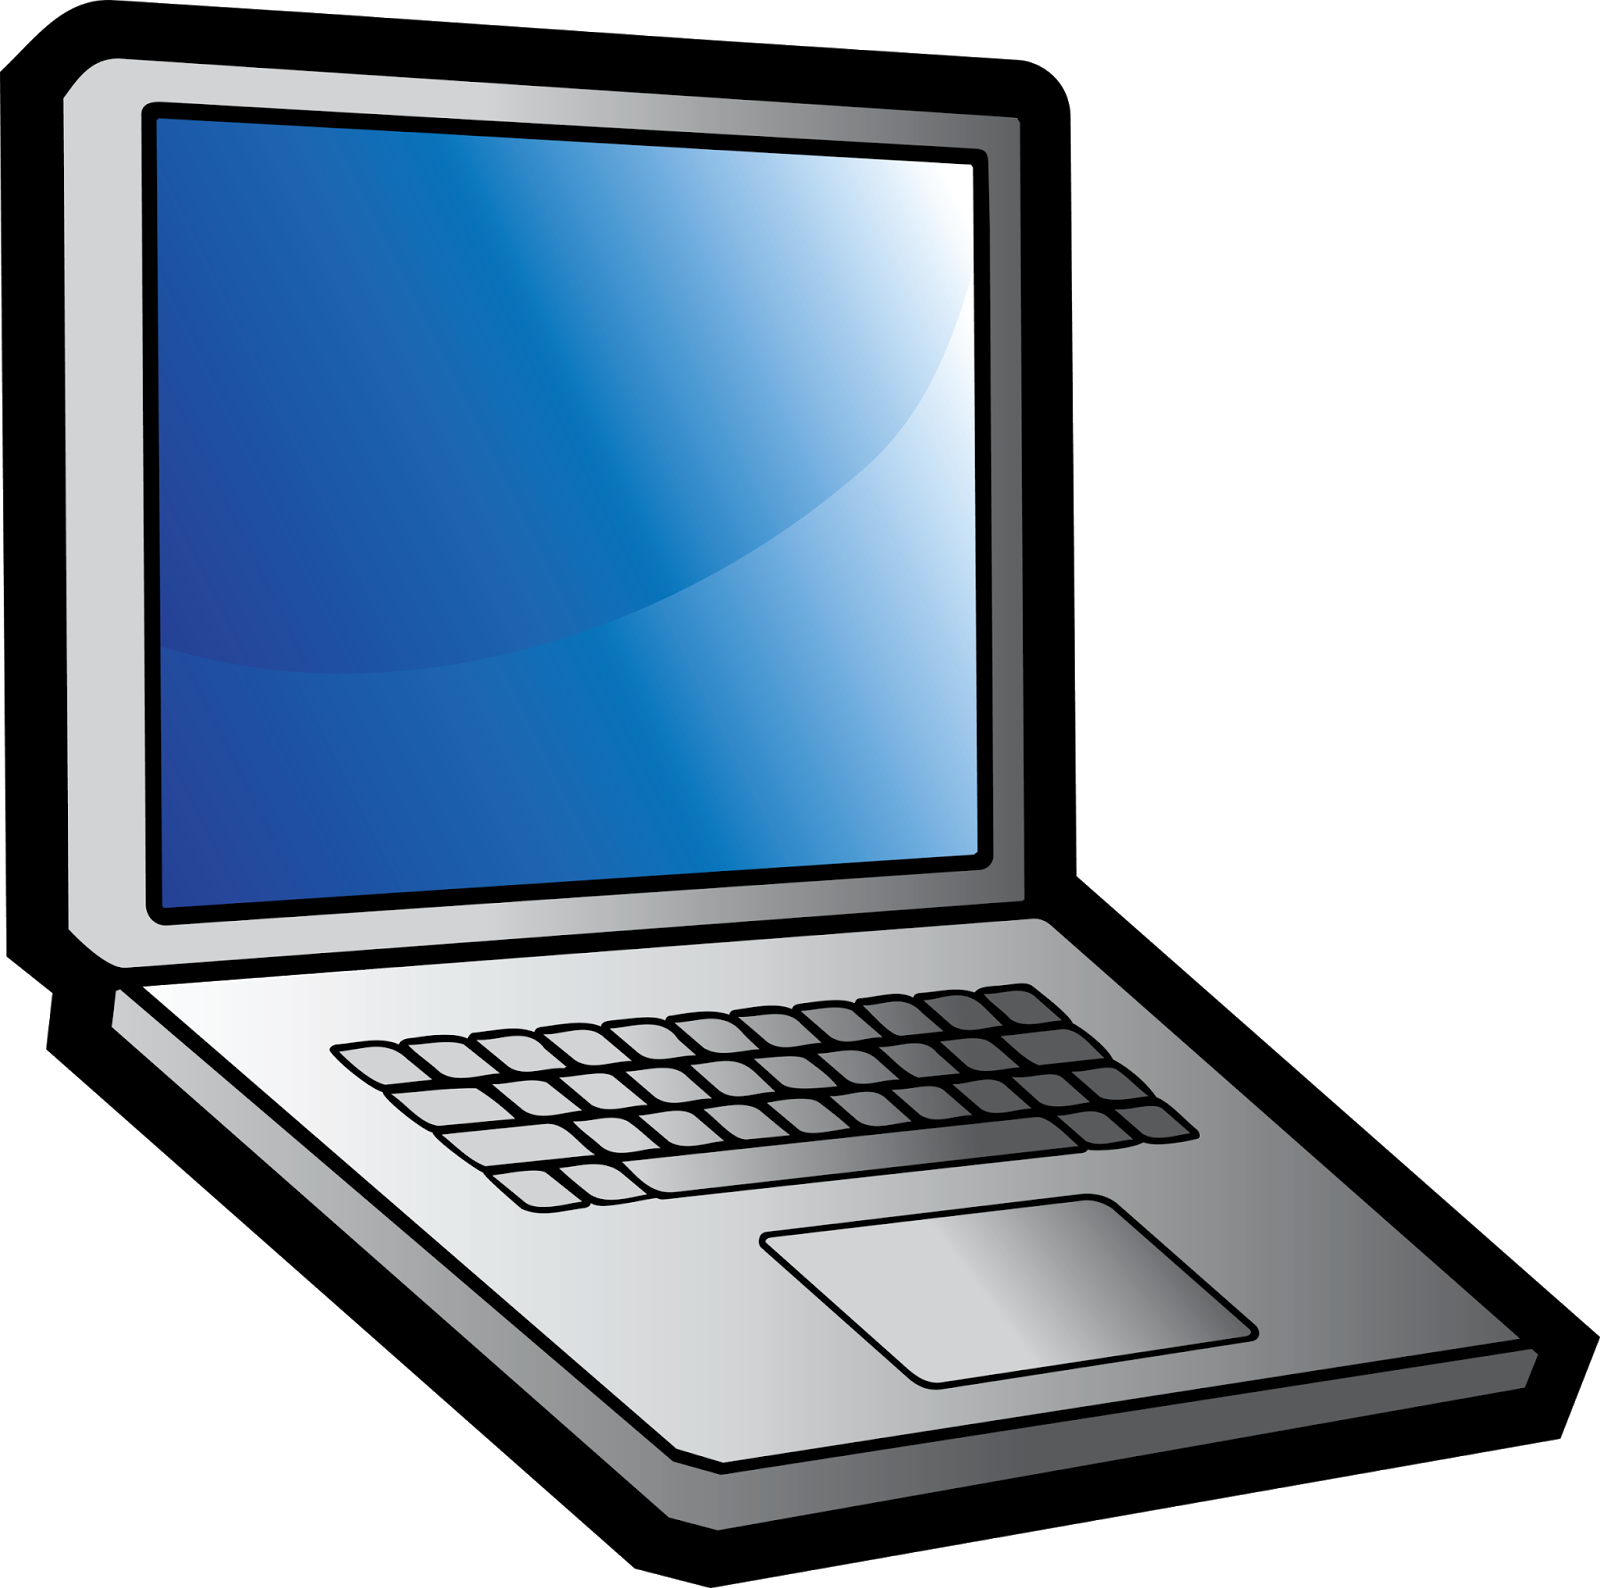 clipart of laptop - photo #19